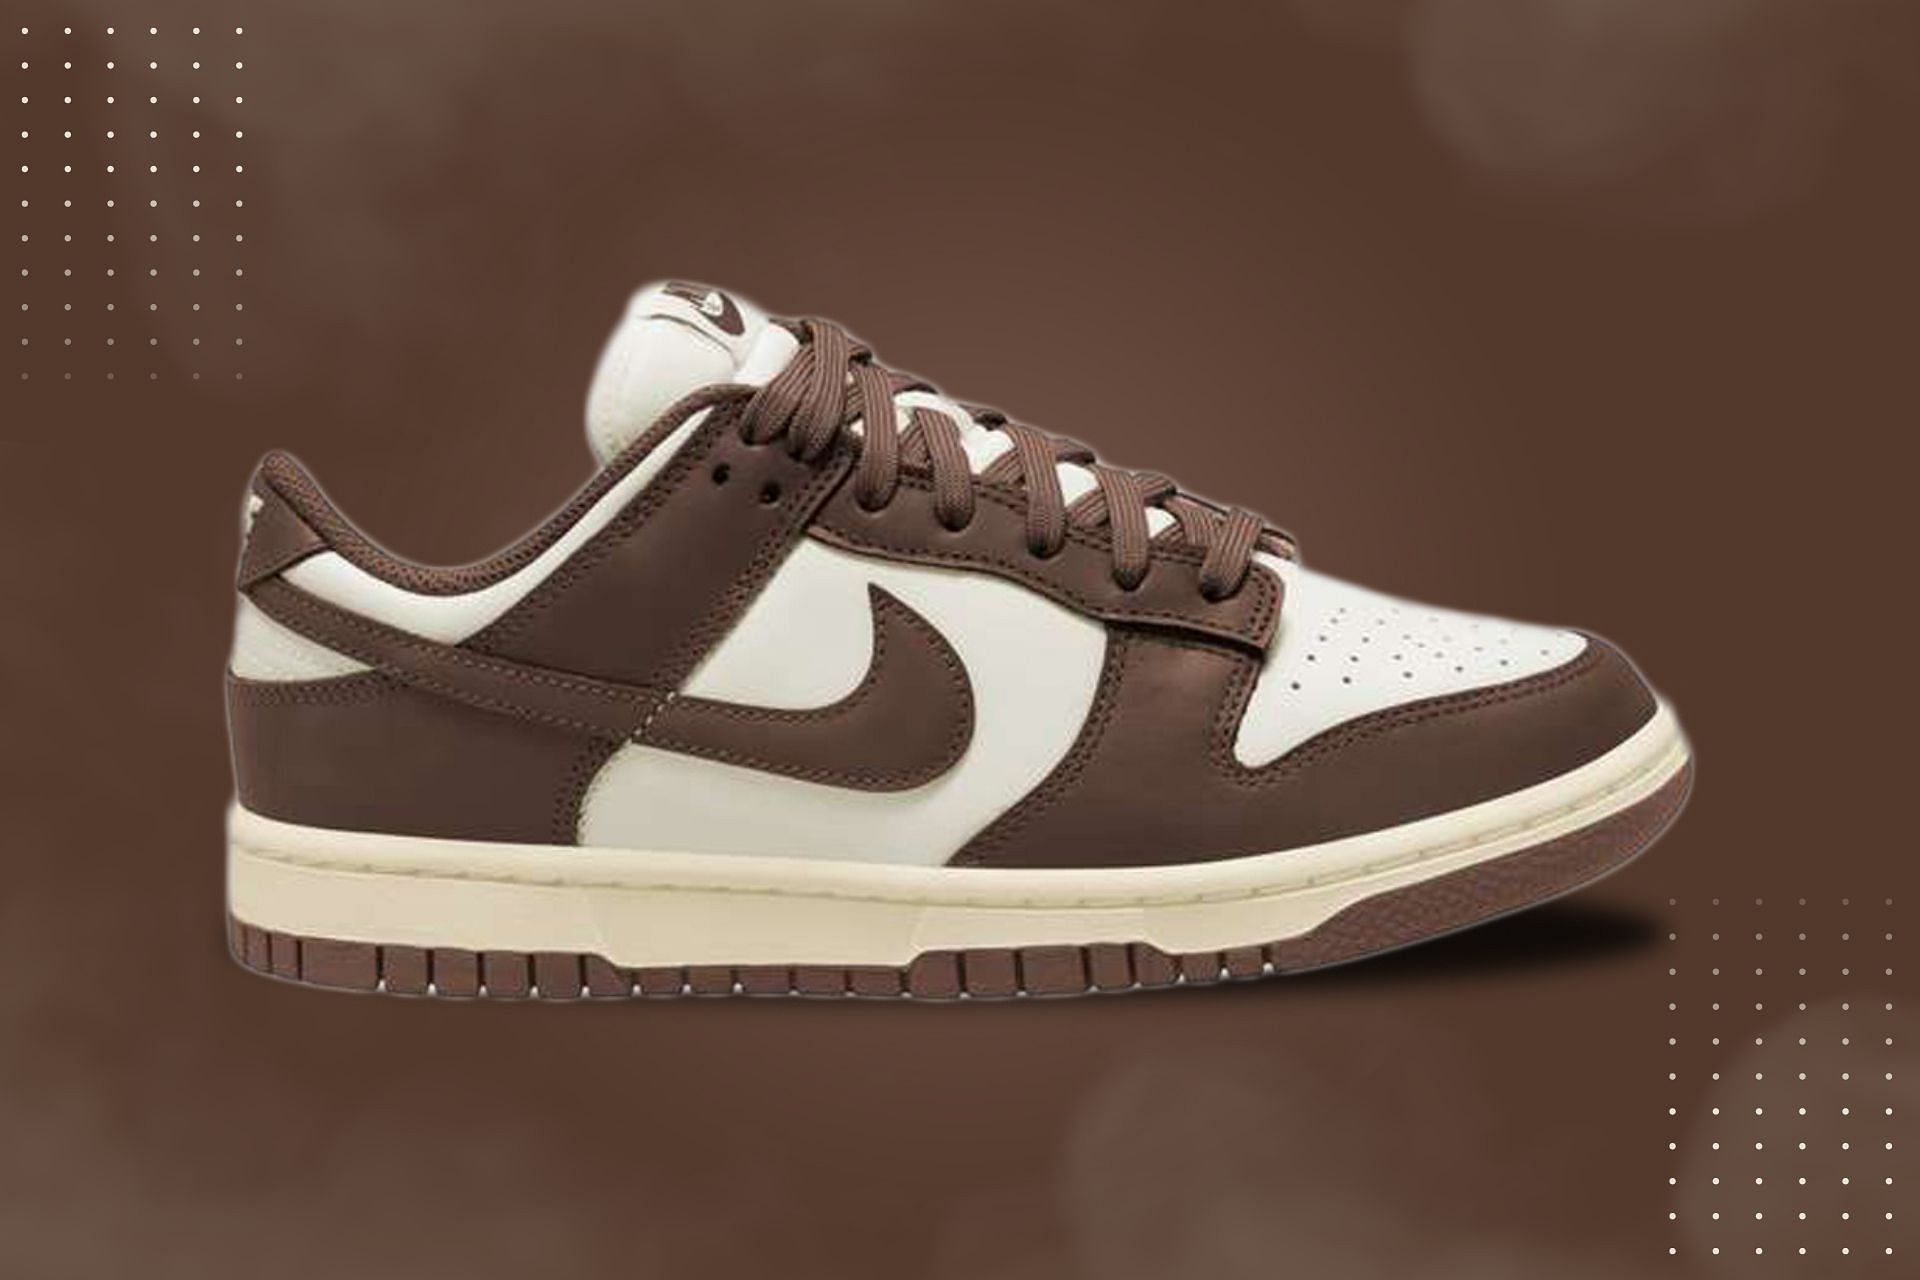 Nike Dunk Low Sail Cacao Wow sneakers Where to buy, price, and more